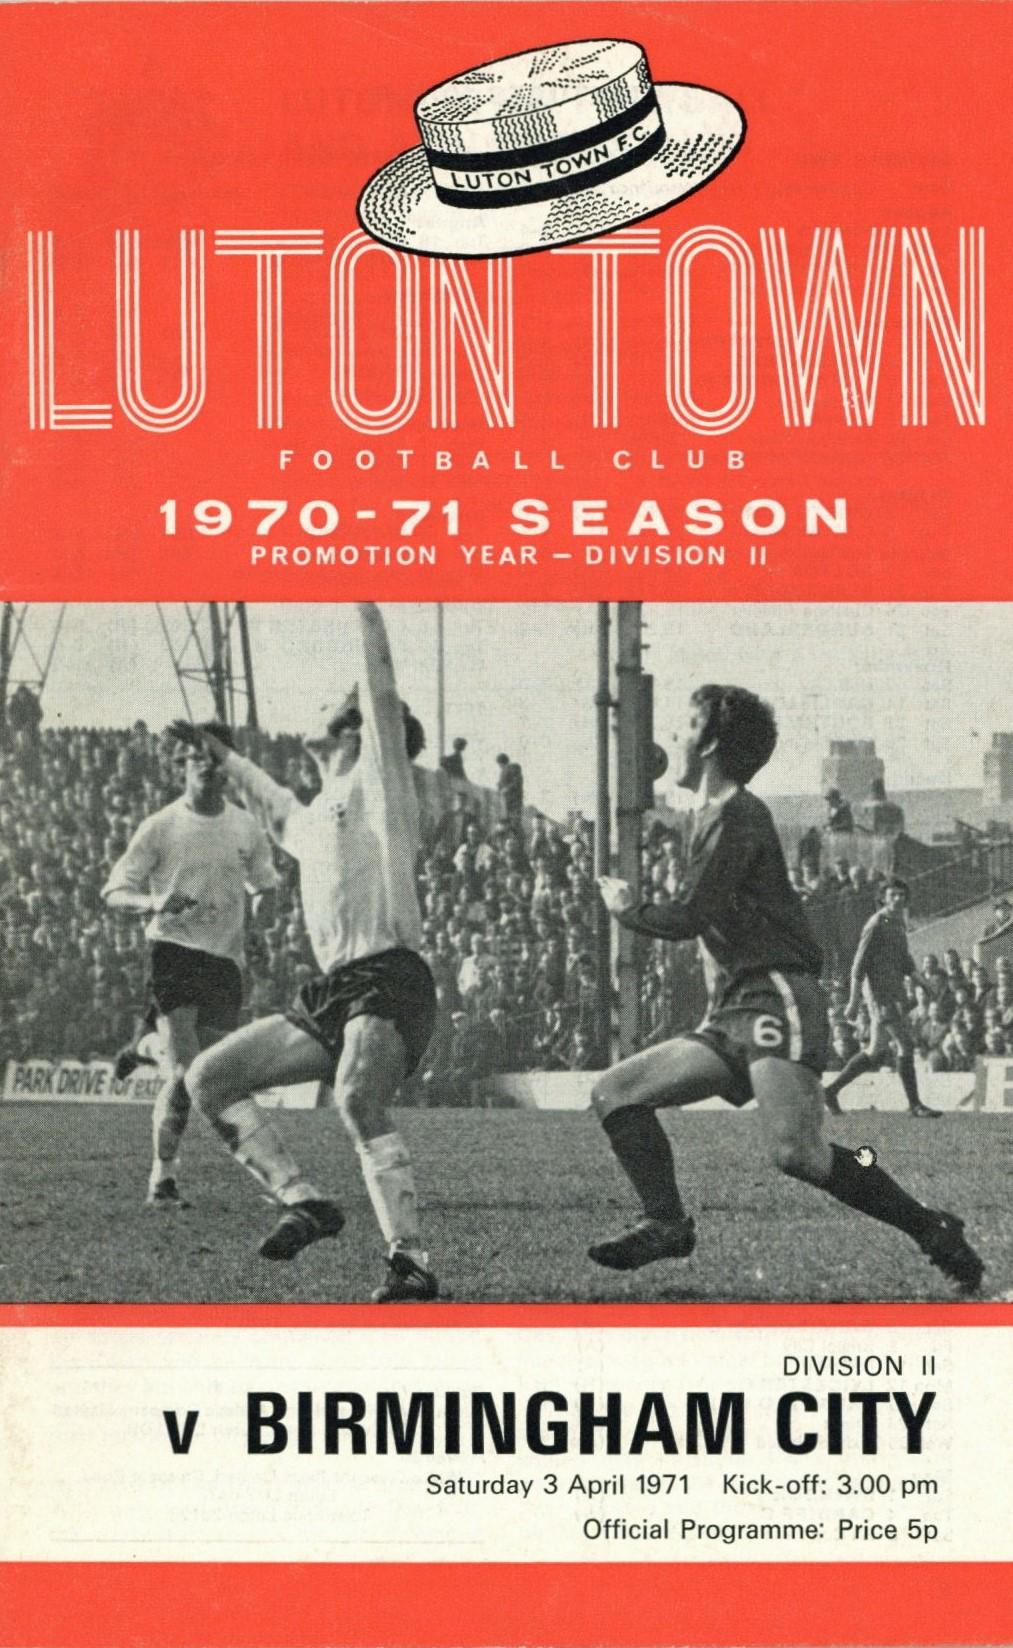 LUTON TOWN HOMES 1970/71 